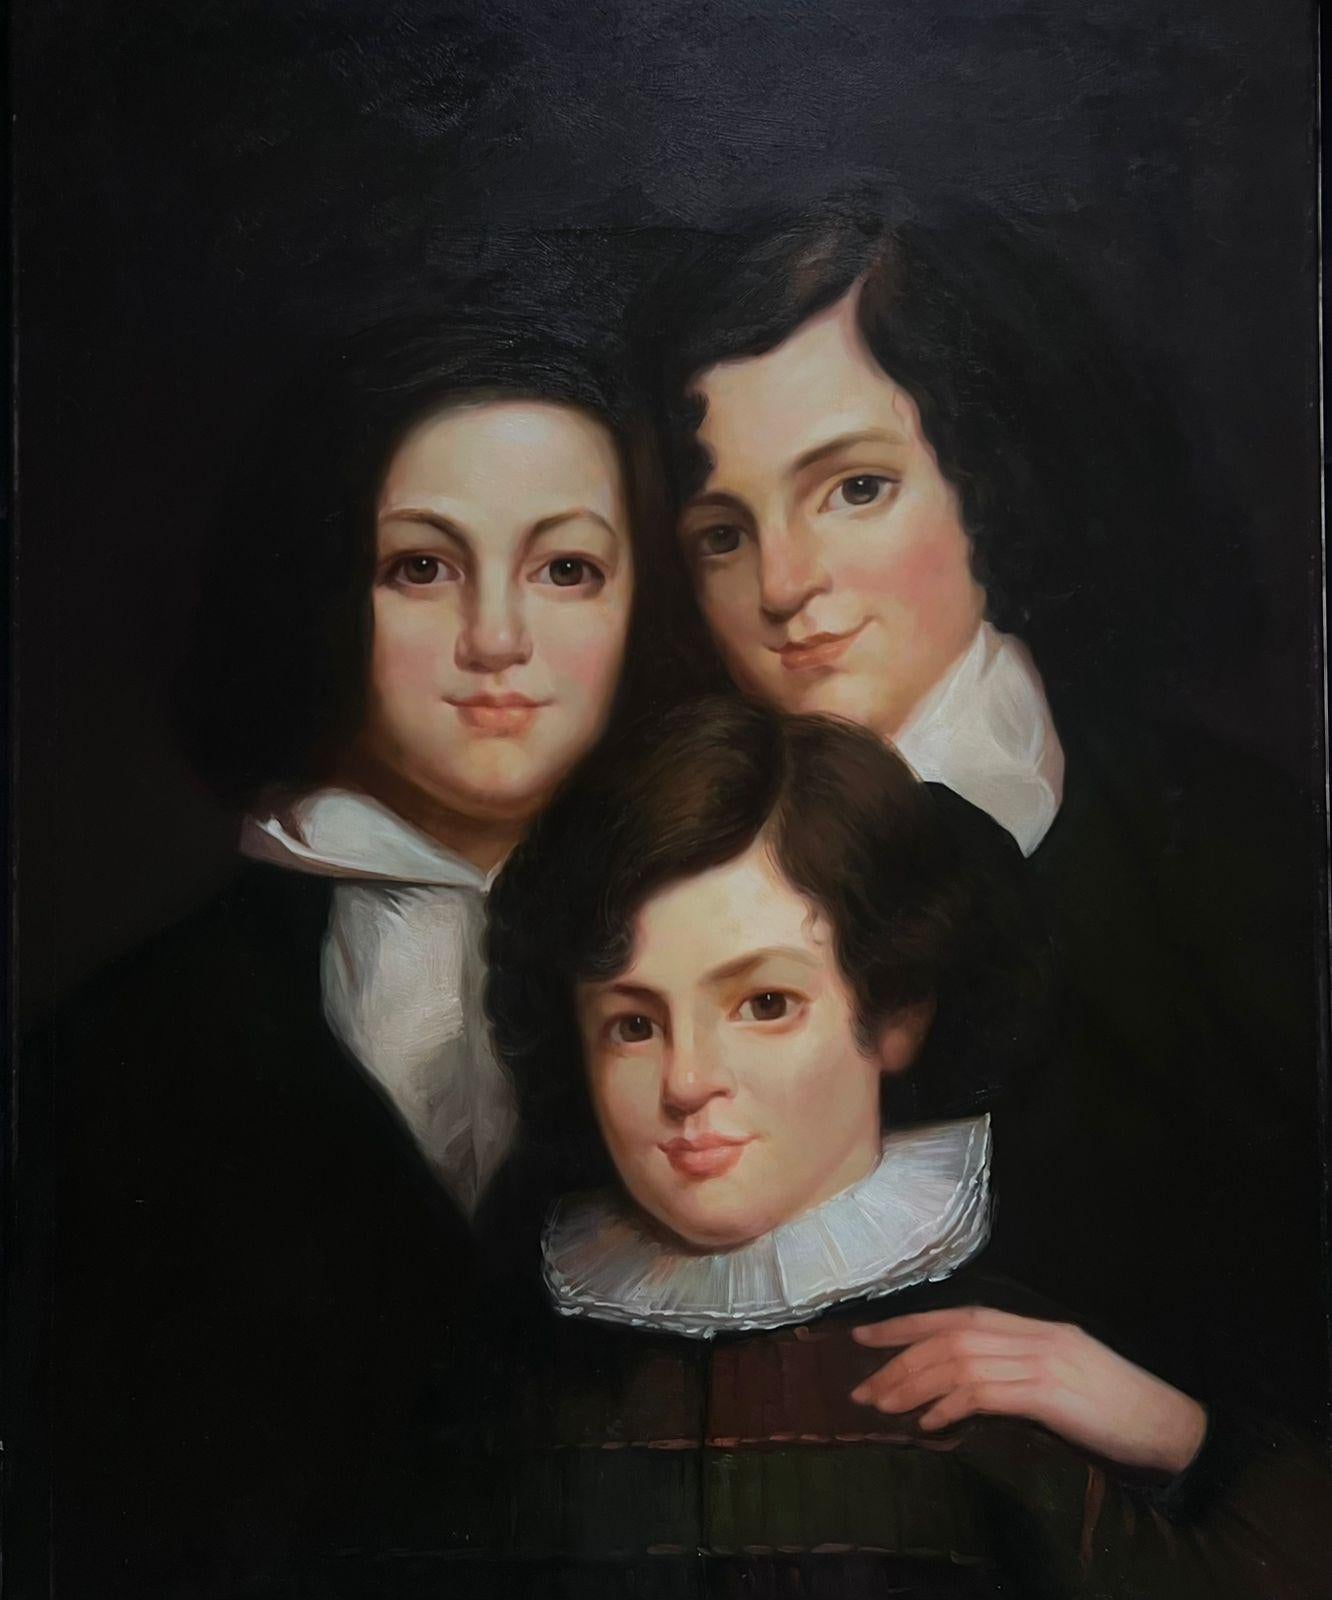 The Family Portrait
British School, 20th century
(painted in an earlier style)
oil on canvas, unframed
canvas: 30 x 24 inches
provenance: private collection, England
condition: overall good and sound condition 